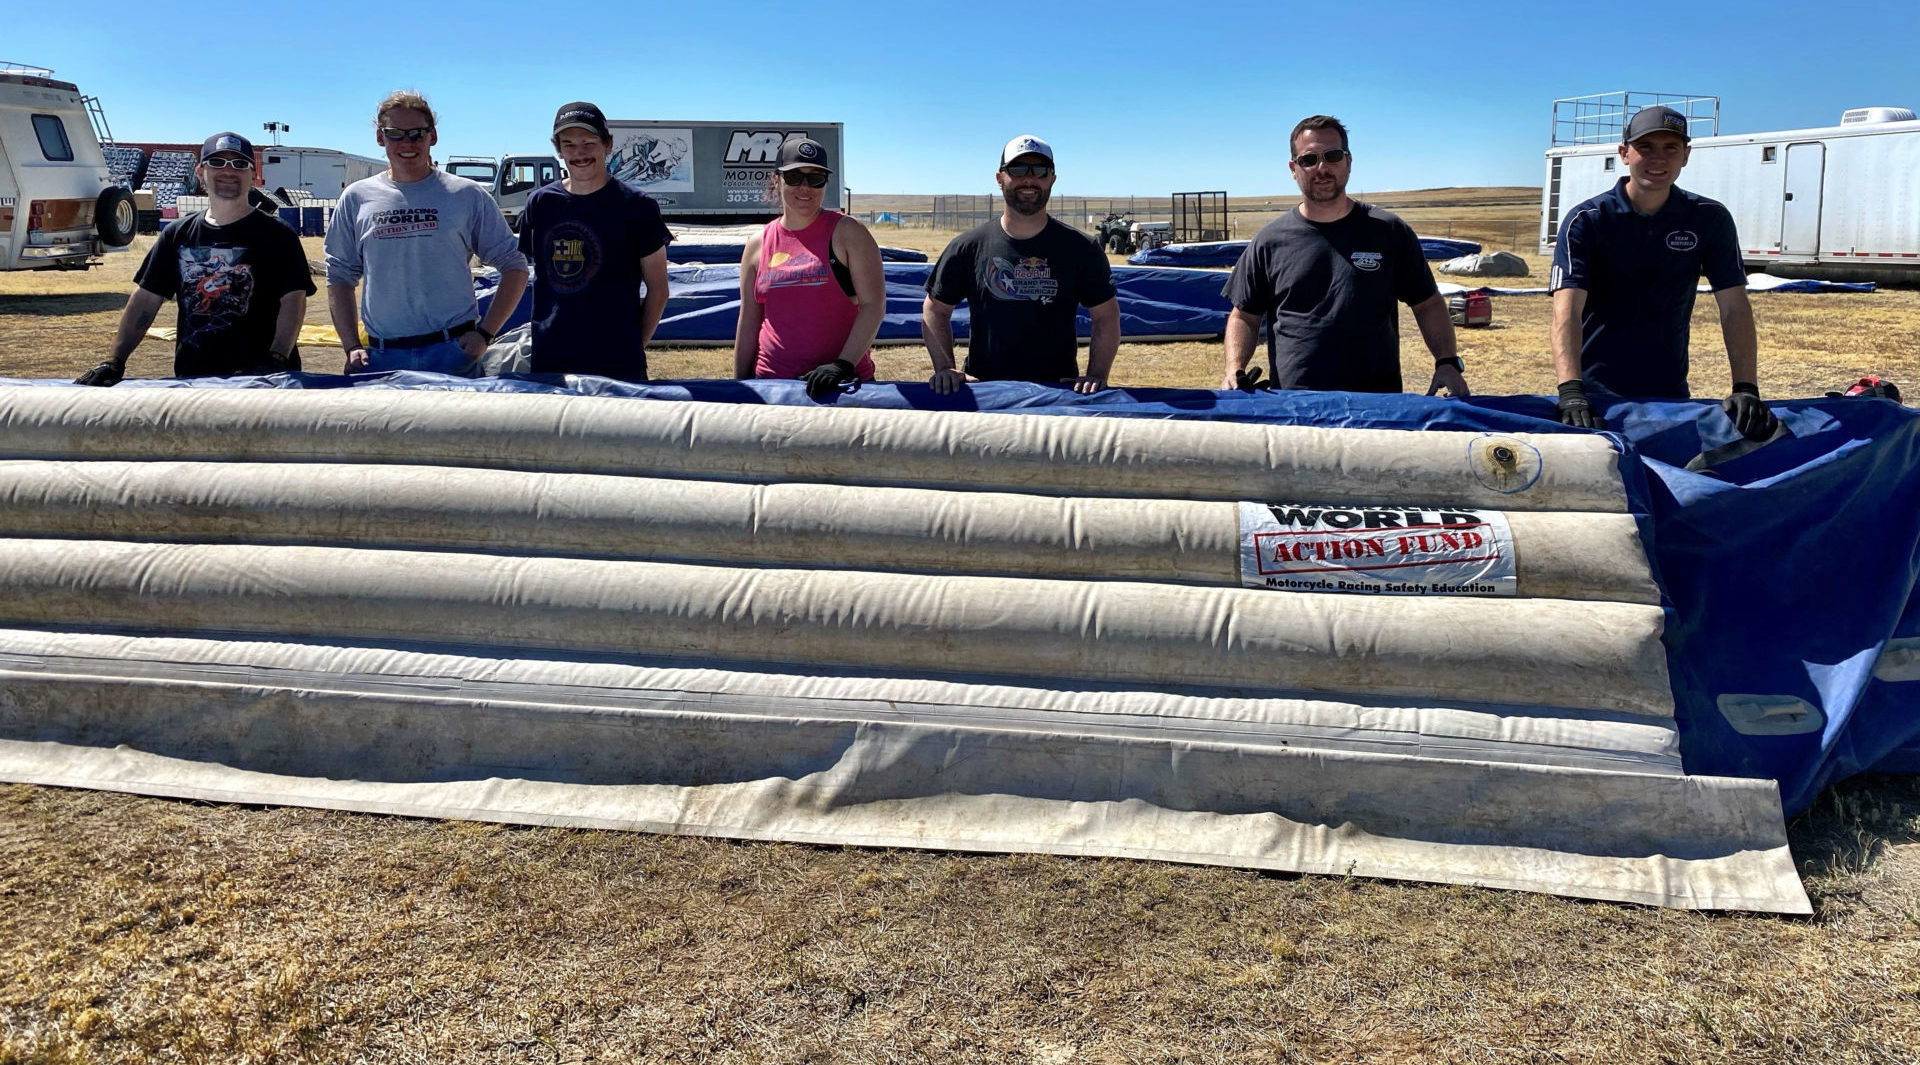 MRA's soft barrier crew (from left): Rick Grosse, Marshal Poet, Tim David, Tiffany Maestas, Phil Pleiss, Jim Wilson, and Cameron Lee. Photo by Phil Pleiss, courtesy MRA.